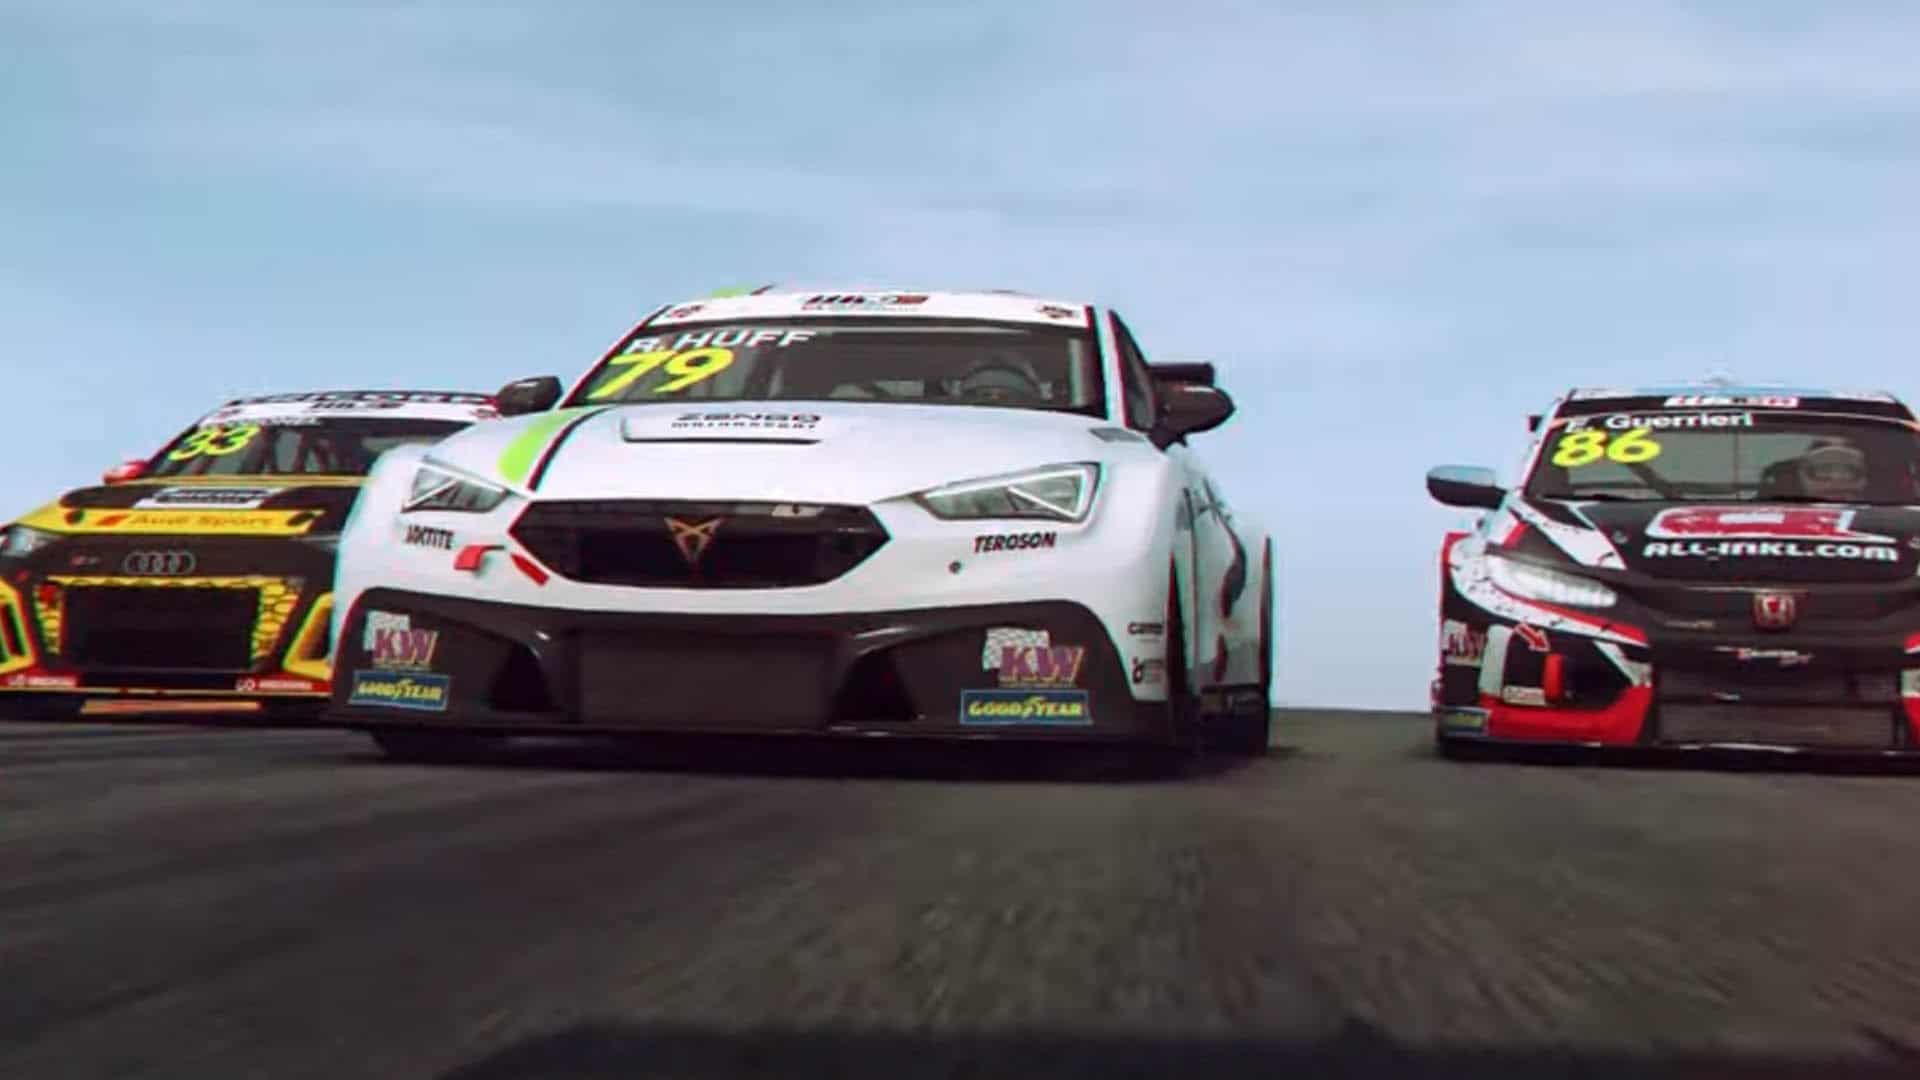 WTCR’s esports competition returns for 2023, qualifiers open this week